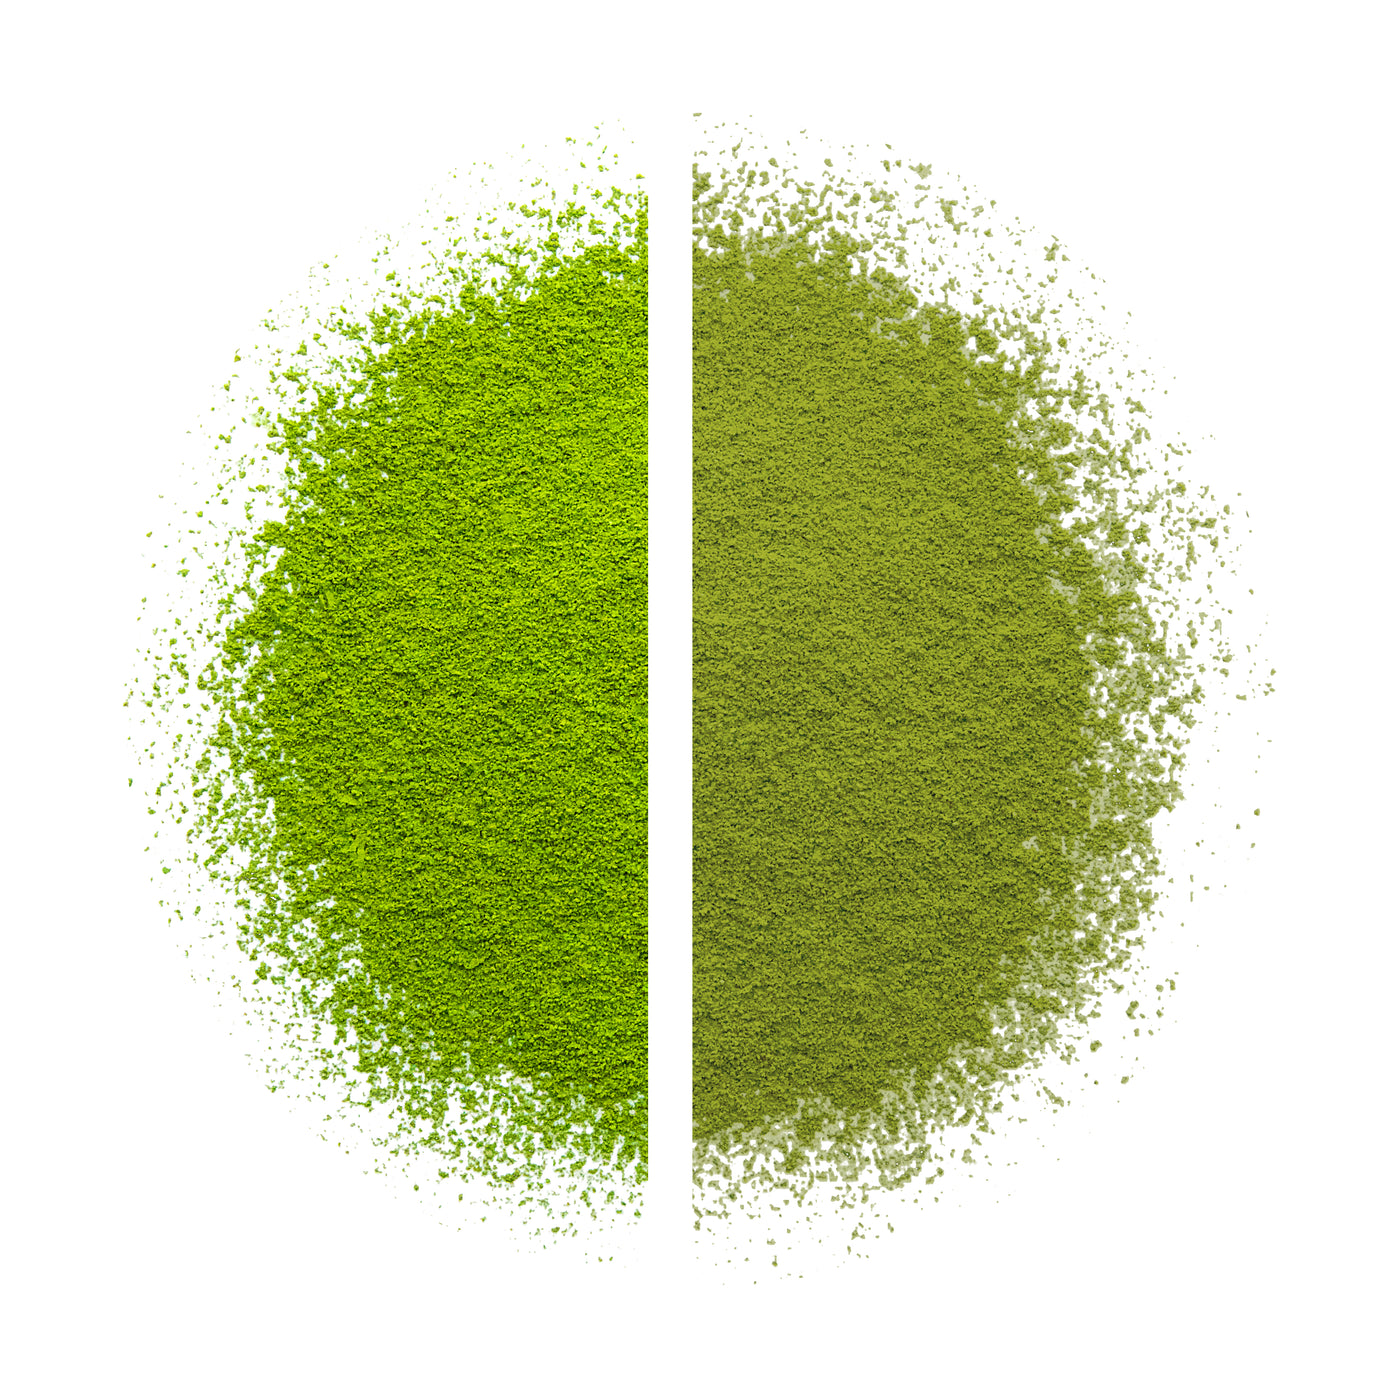 The Differences Between Japanese Vs Chinese Grown Matcha – And Why Japanese Matcha is Superior